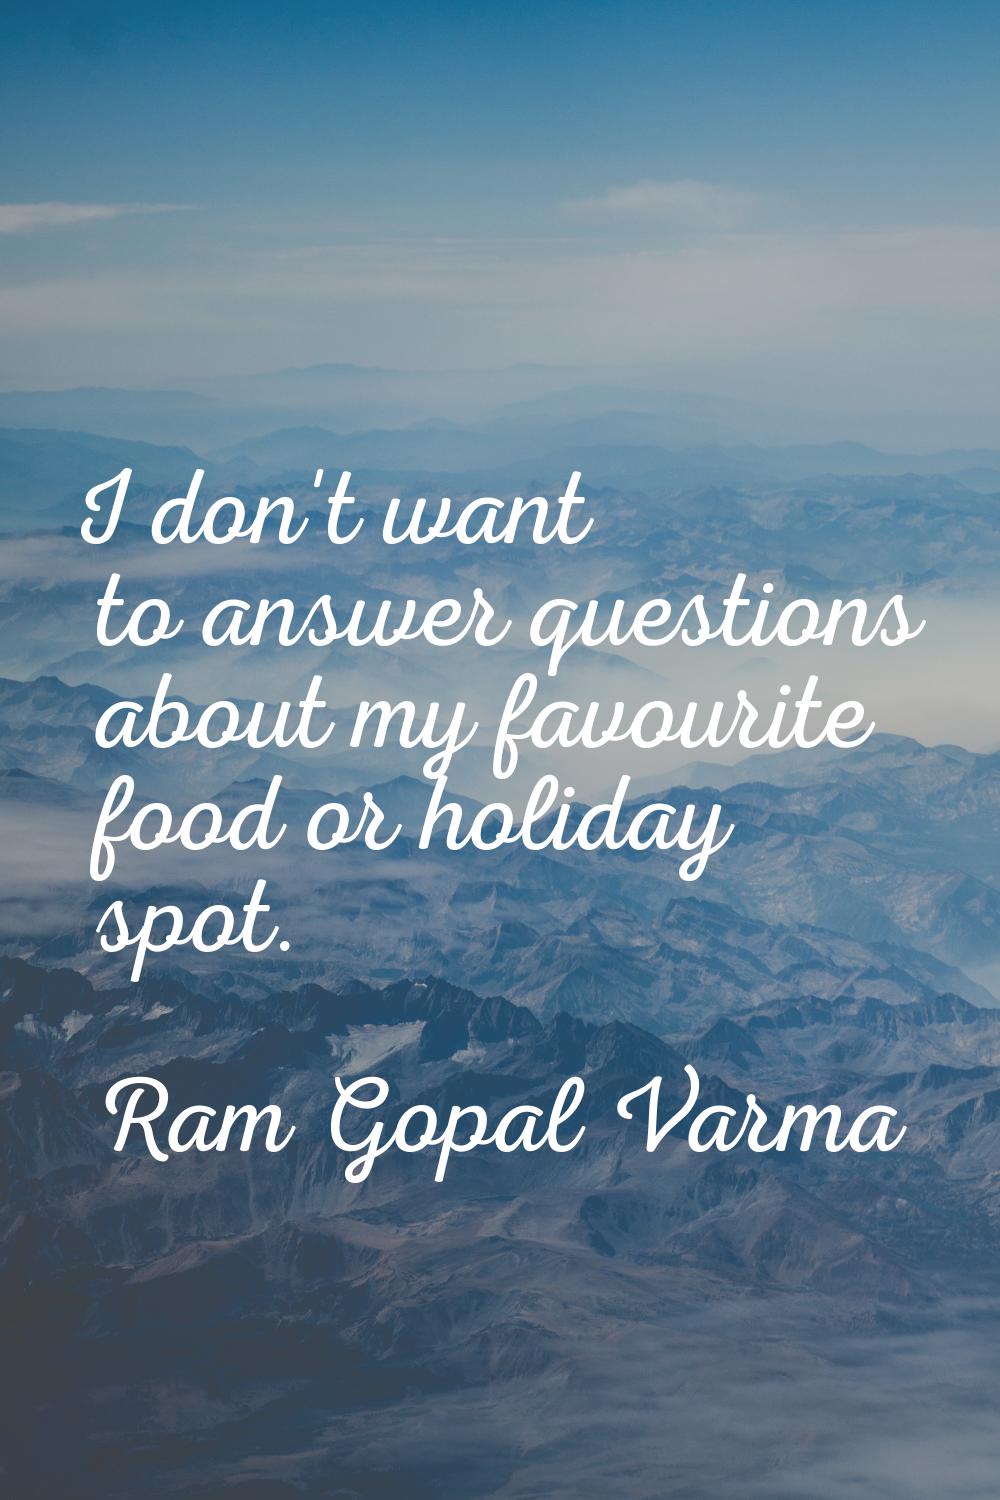 I don't want to answer questions about my favourite food or holiday spot.